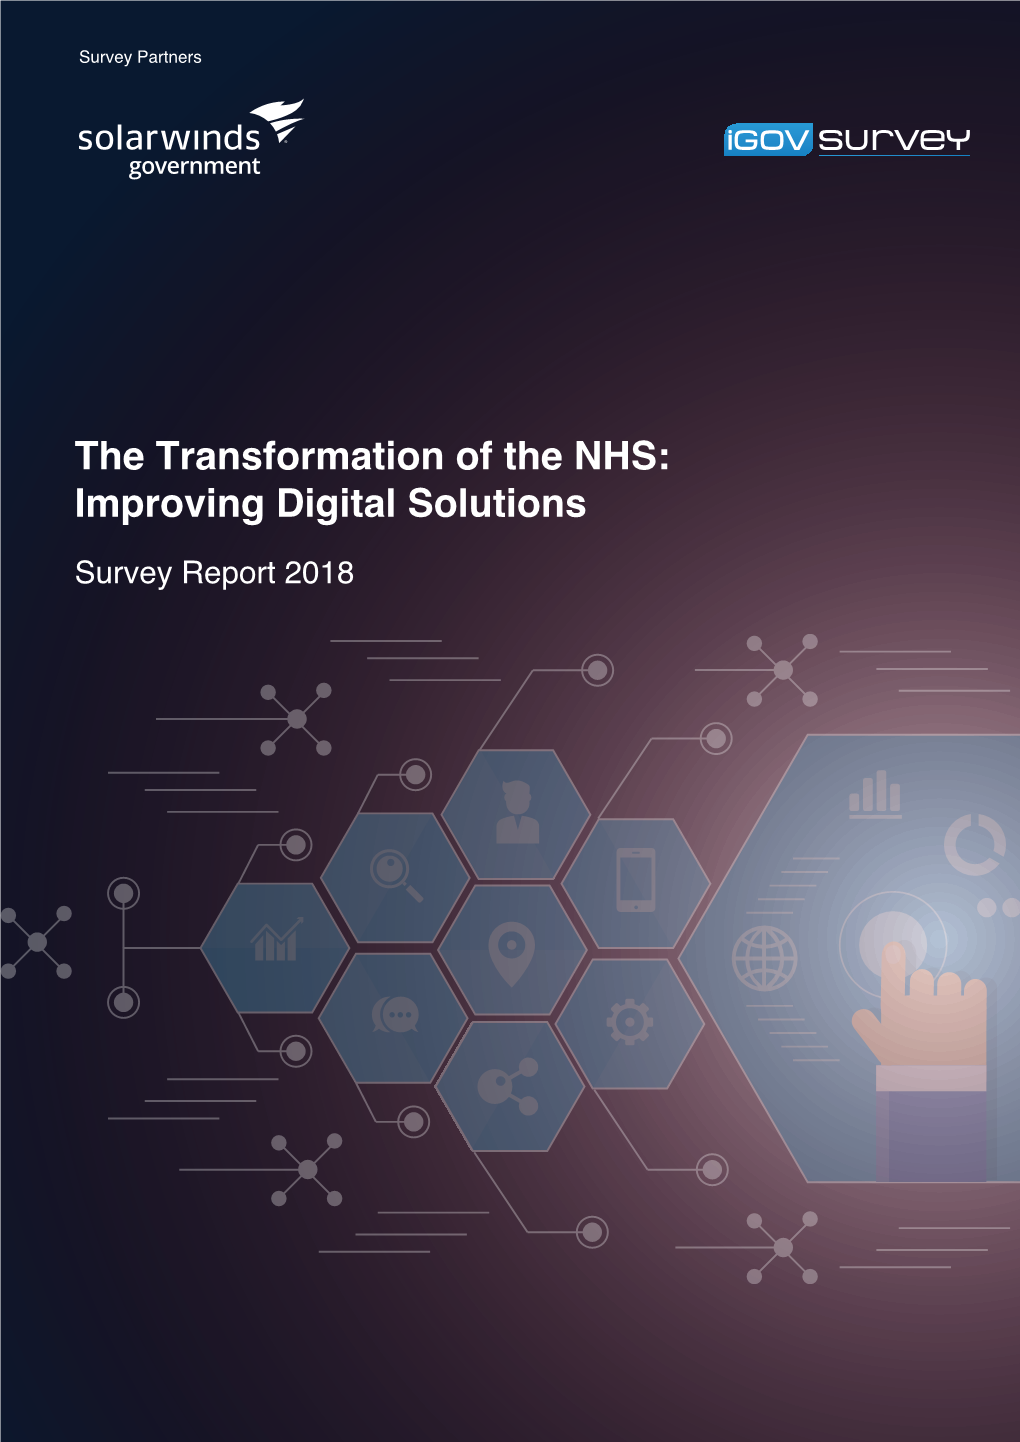 The Transformation of the NHS- Improving Digital Solutions 2018